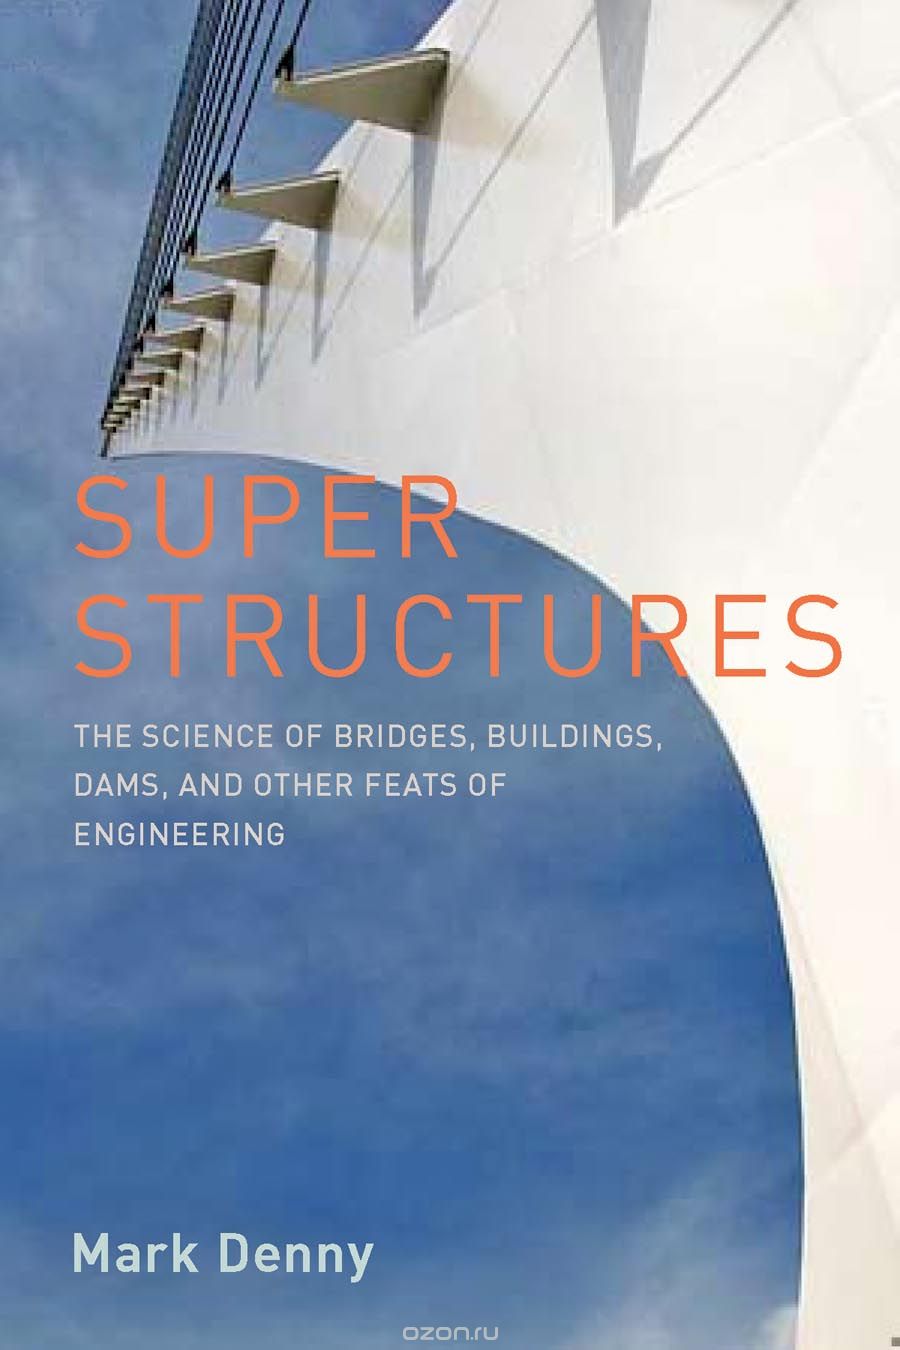 Super Structures – The Science of Bridges, Buildings, Dams, and Other Feats of Engineering